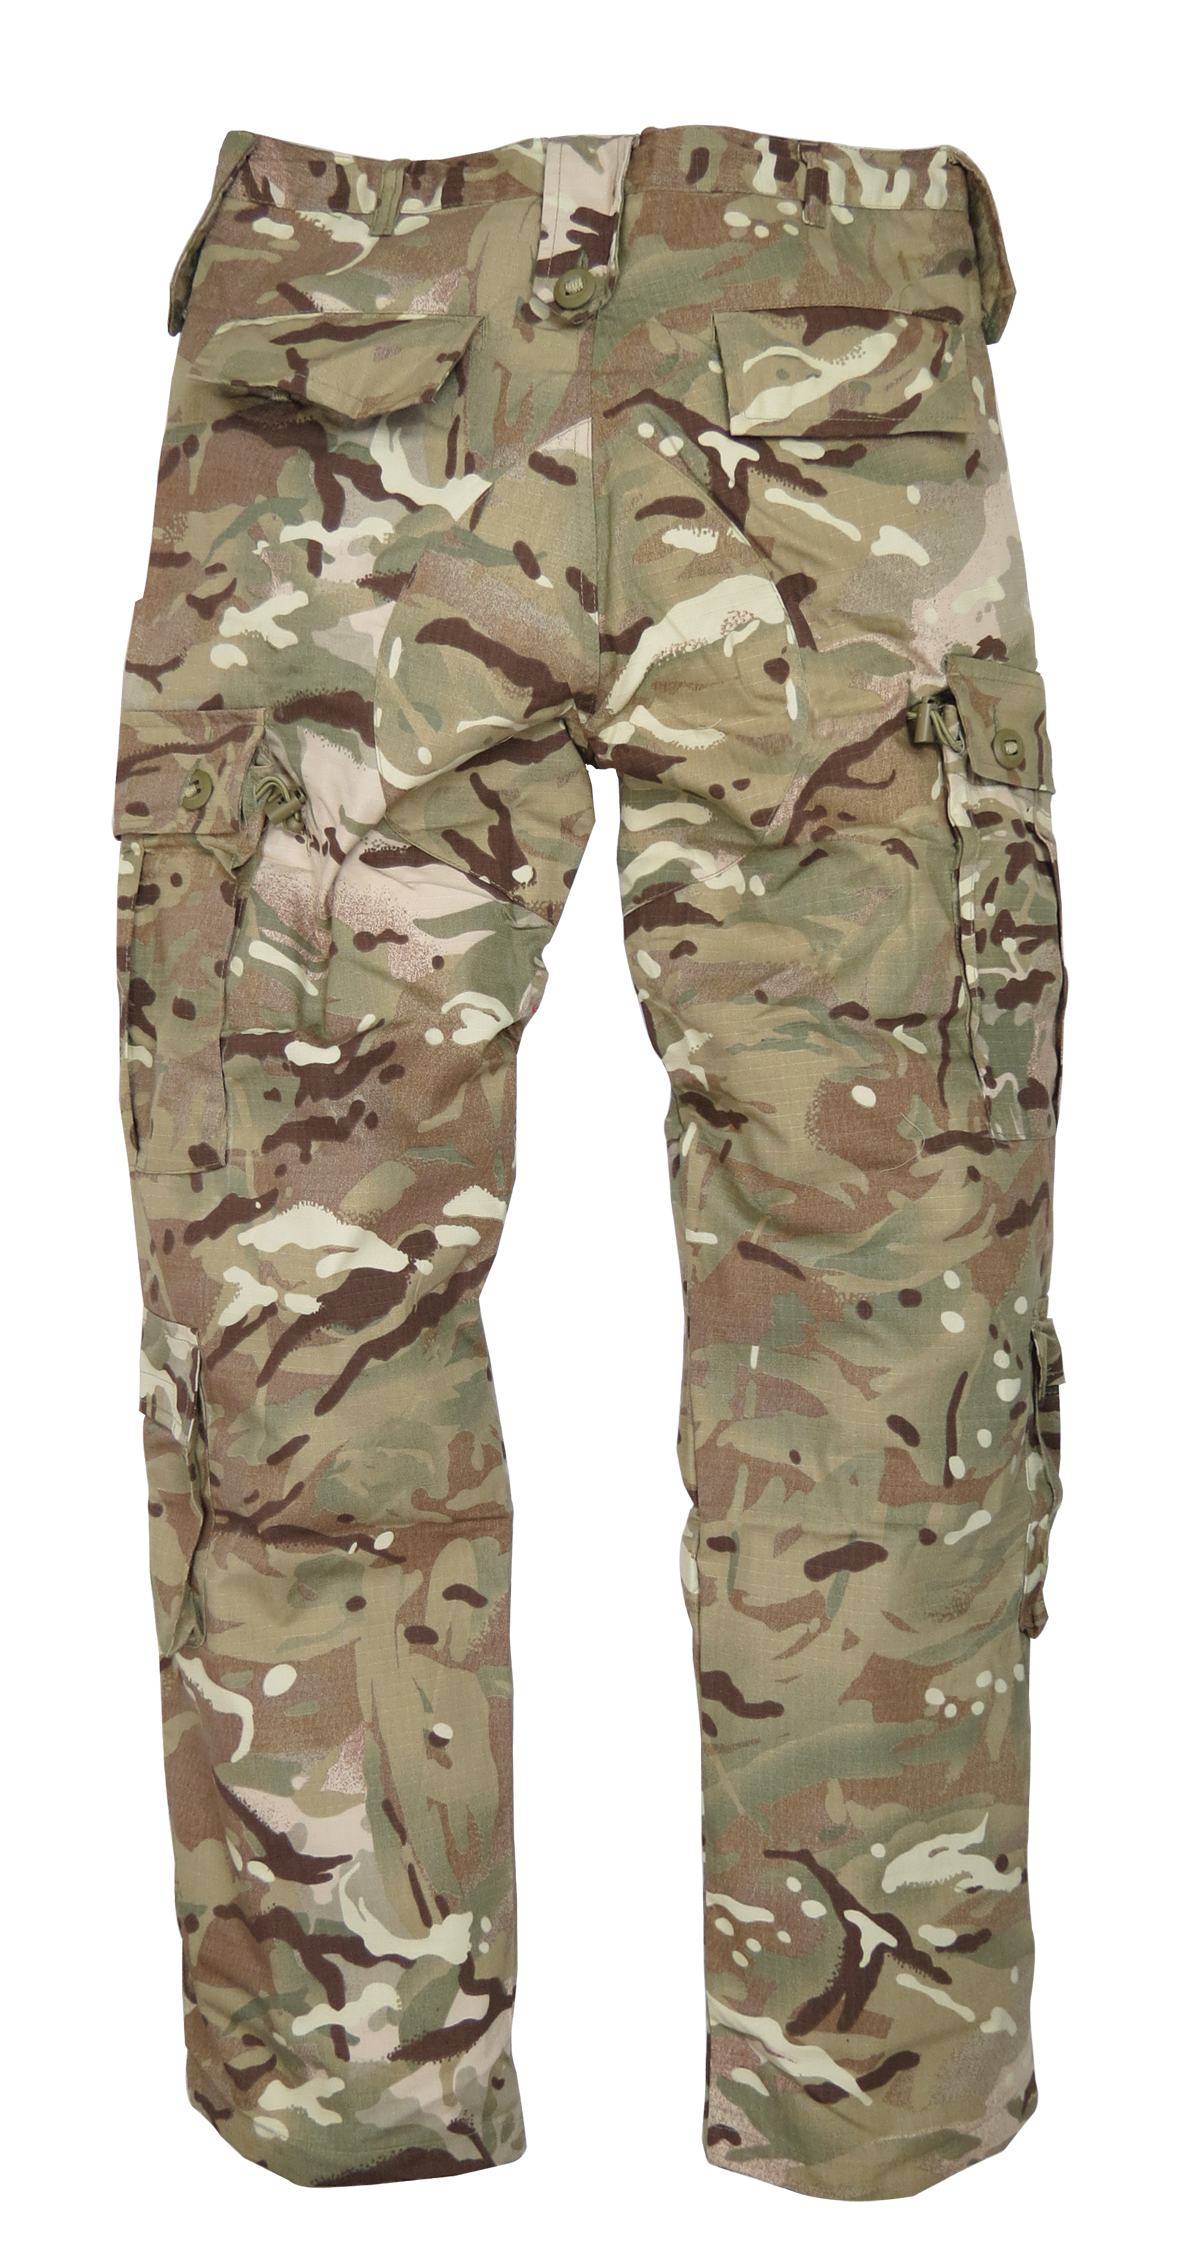 british army style ripstop elite hmtc trousers by highlander